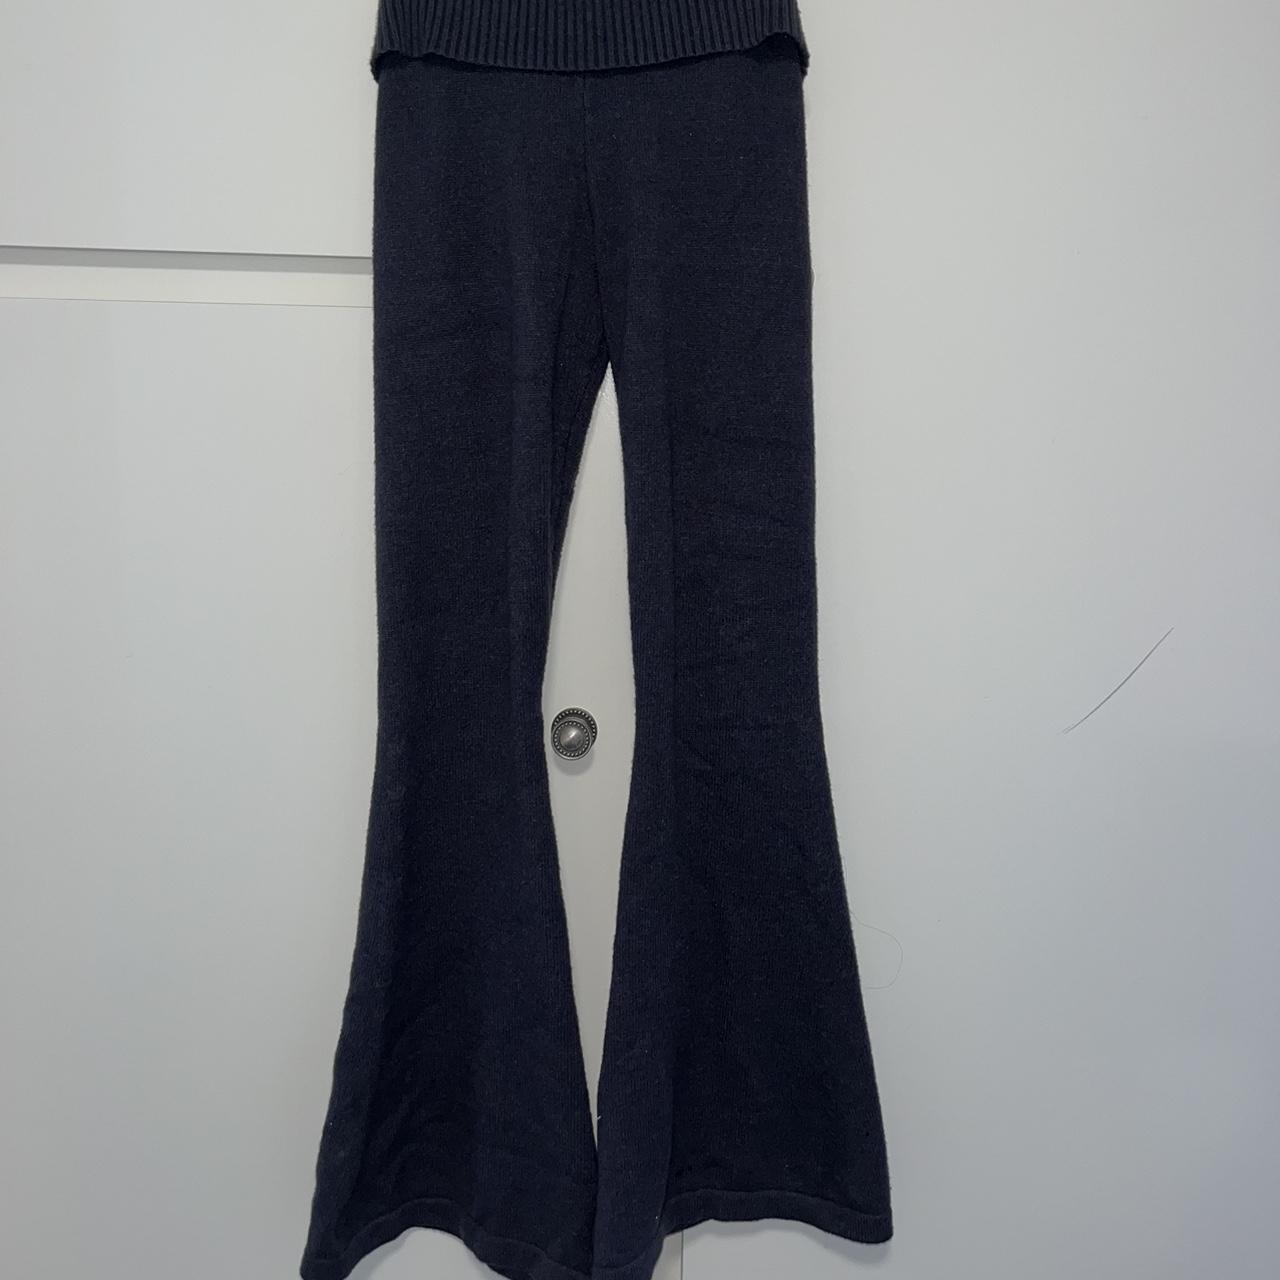 Edikted Women's Navy and Grey Trousers (2)